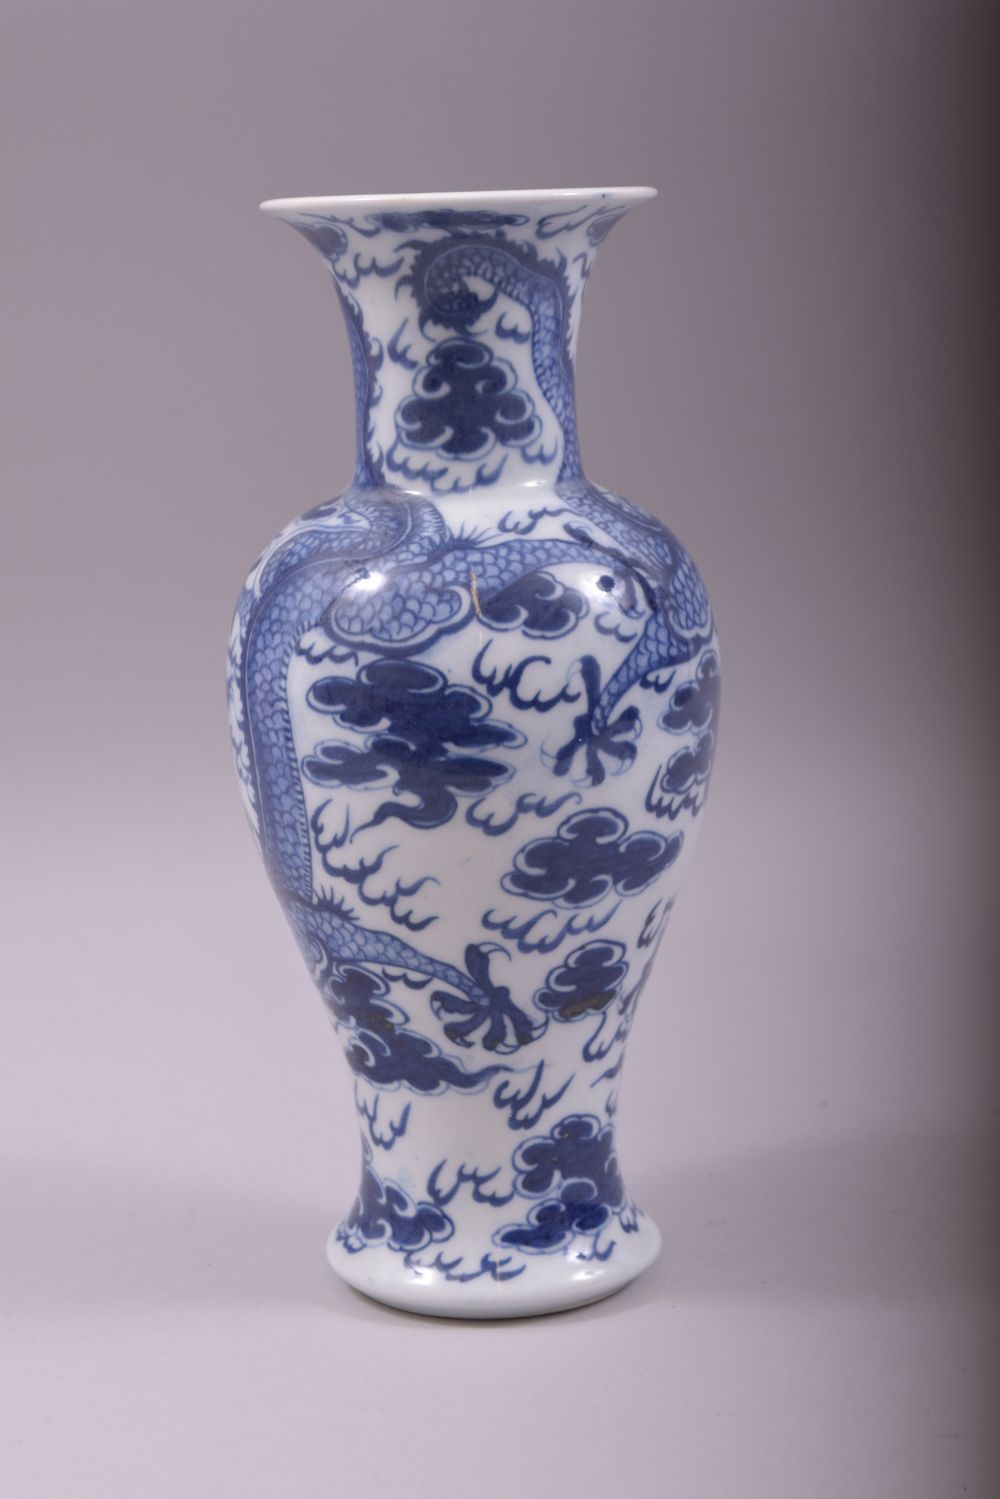 A CHINESE BLUE AND WHITE PORCELAIN DRAGON VASE, 23.5cm high. - Image 3 of 6